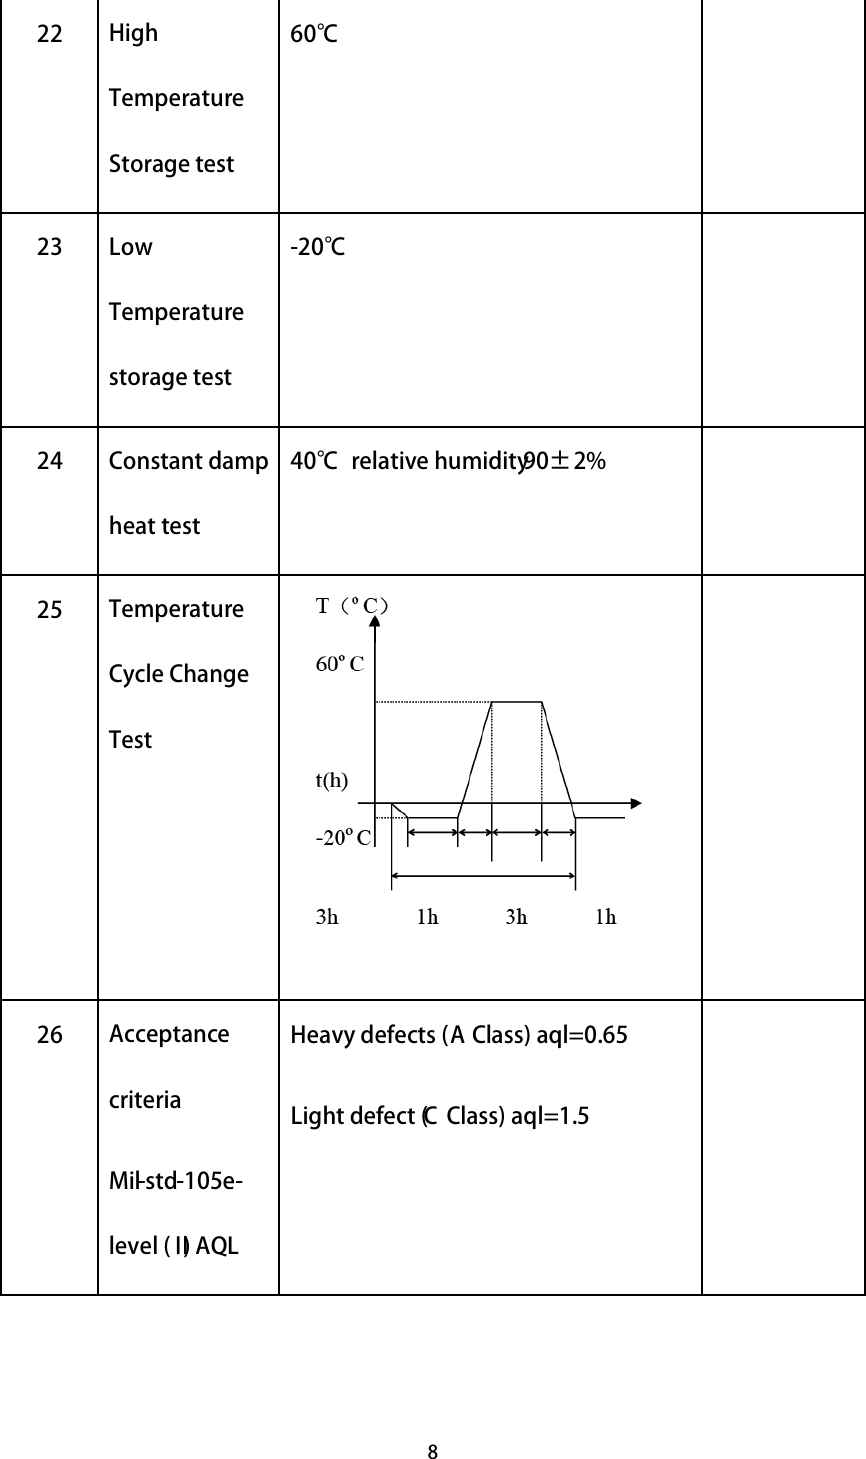 8  22  High Temperature Storage test 60℃    23  Low Temperature storage test -20℃    24  Constant damp heat test 40℃  relative humidity 90±  2%    25  Temperature Cycle Change Test    26  Acceptance criteria Mil-std-105e-level (Ⅱ) AQL Heavy defects (A Class) aql=0.65 Light defect (C Class) aql=1.5   